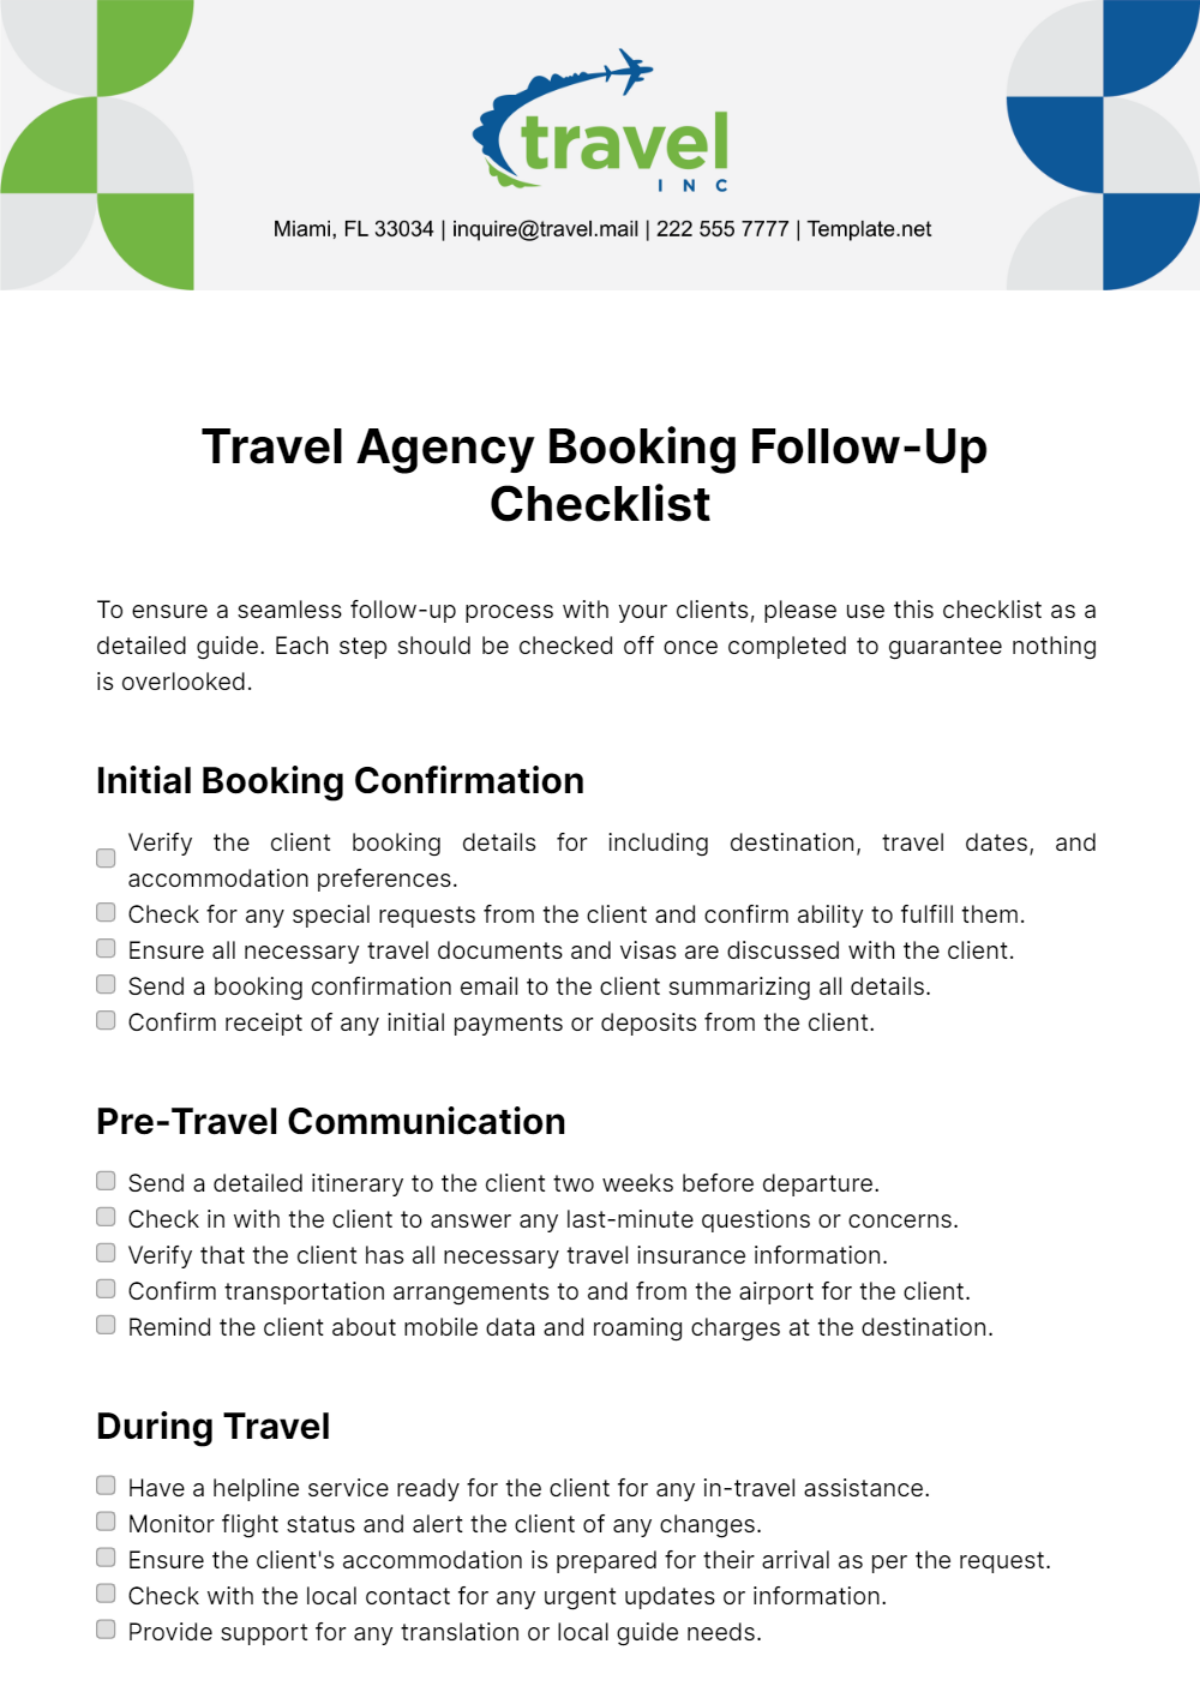 Free Travel Agency Booking Follow-Up Checklist Template